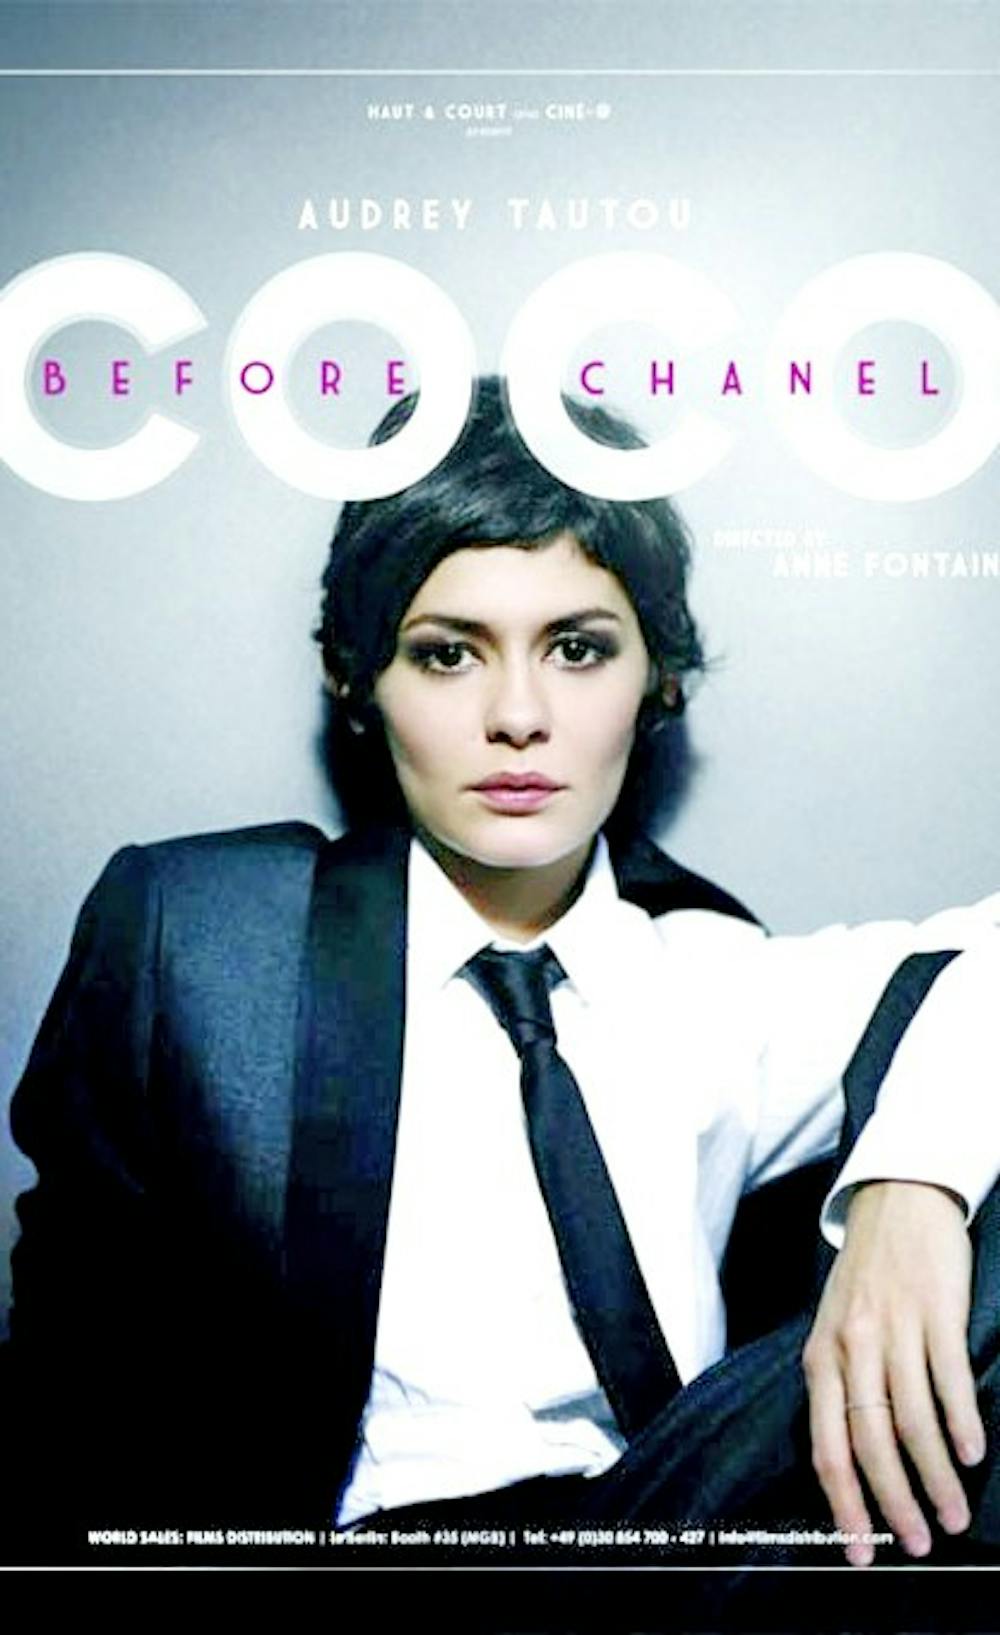 Coco before Chanel is likely to appeal to a niche audience